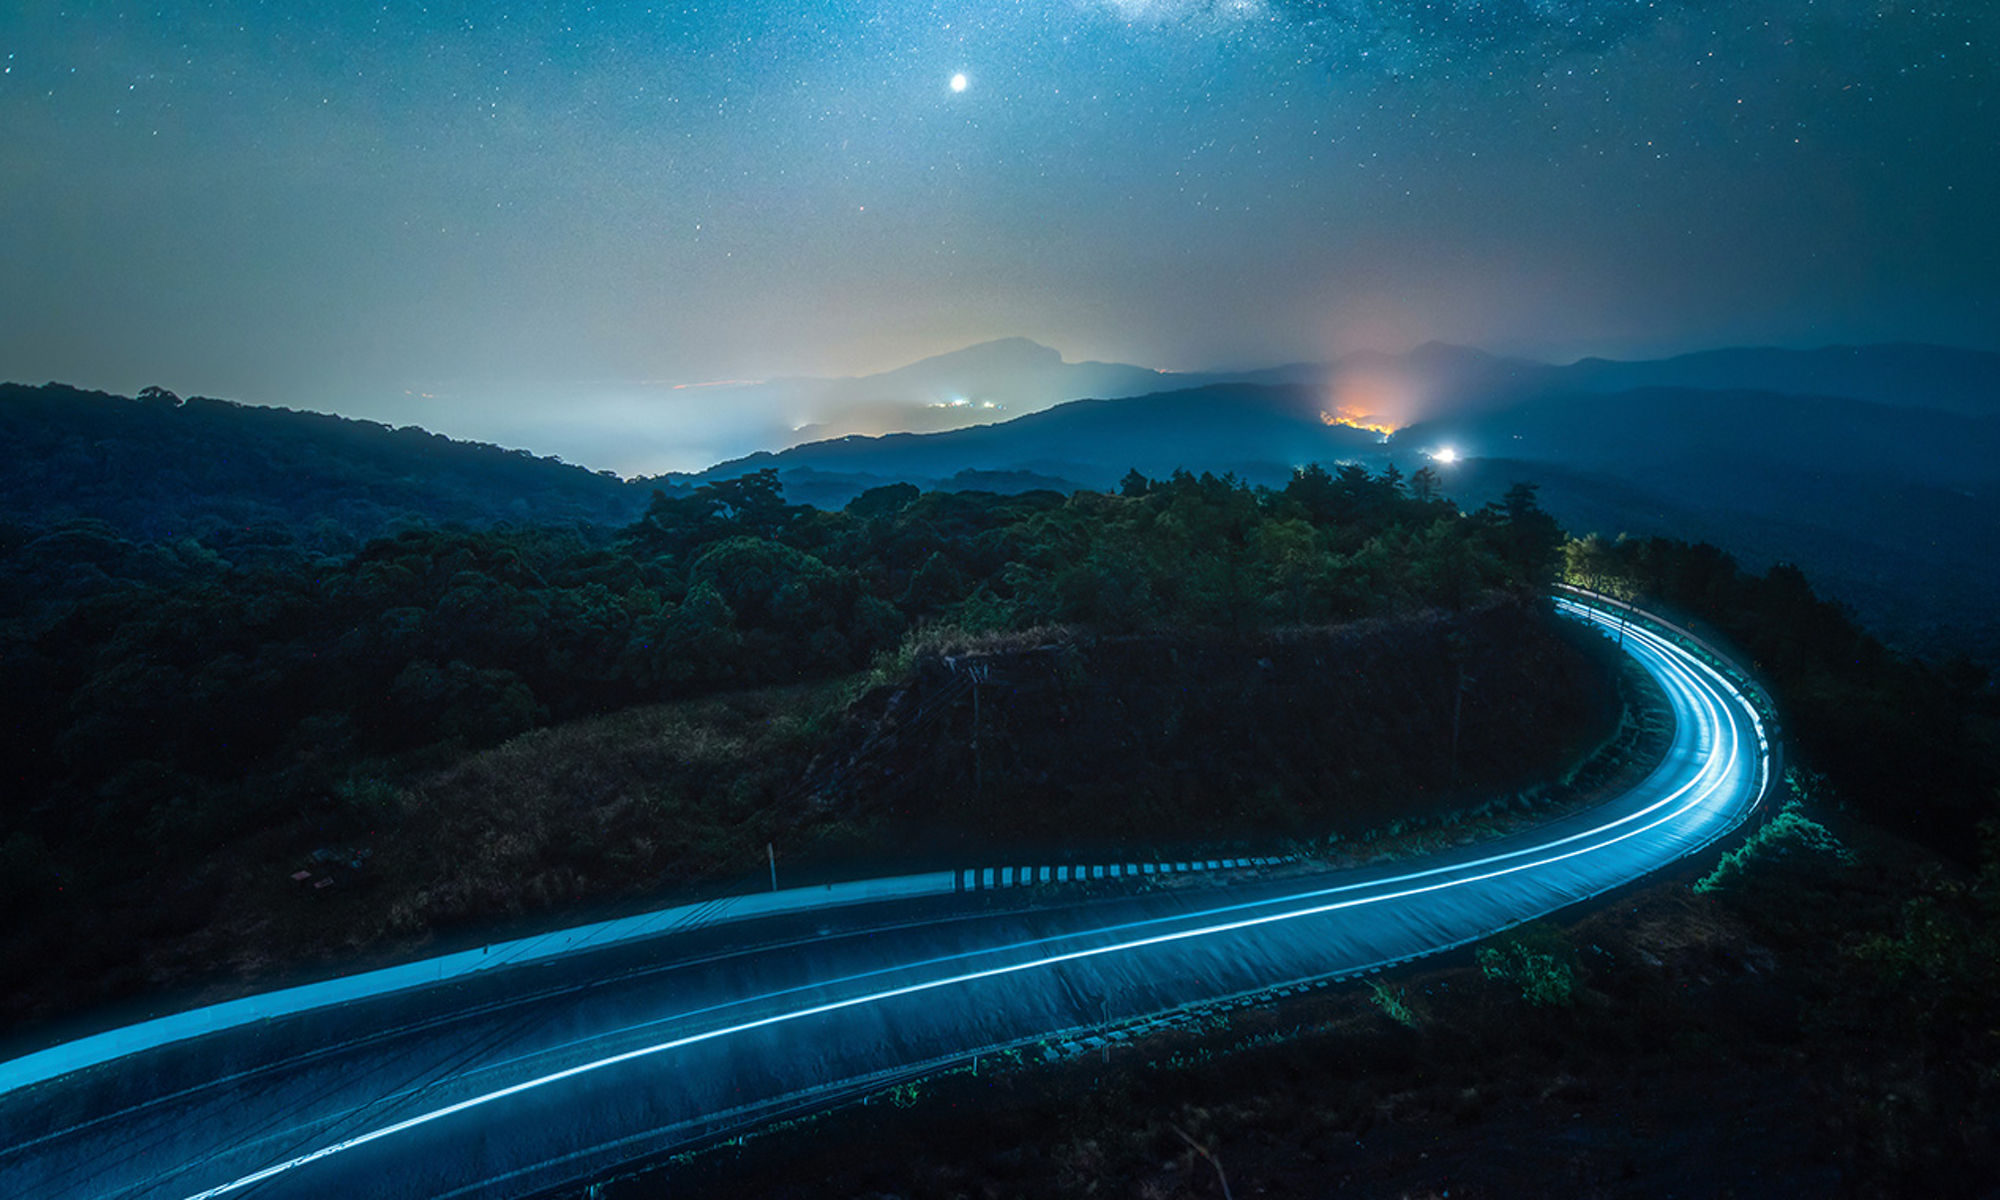 Road going off into the horizon, at night